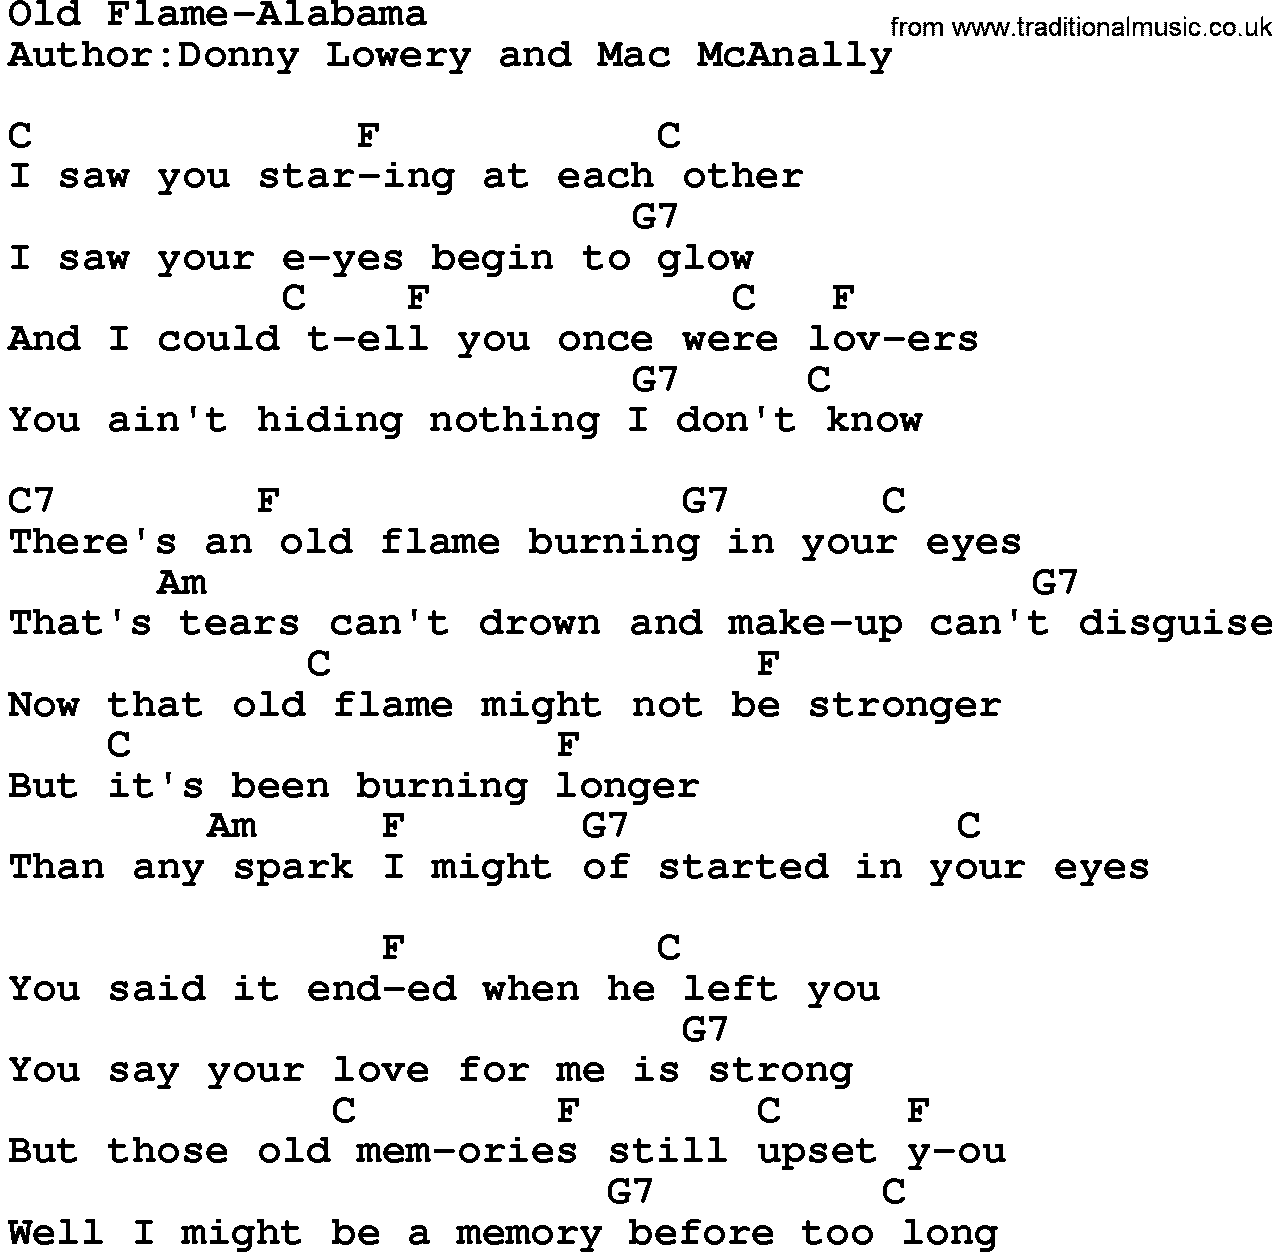 Country music song: Old Flame-Alabama lyrics and chords